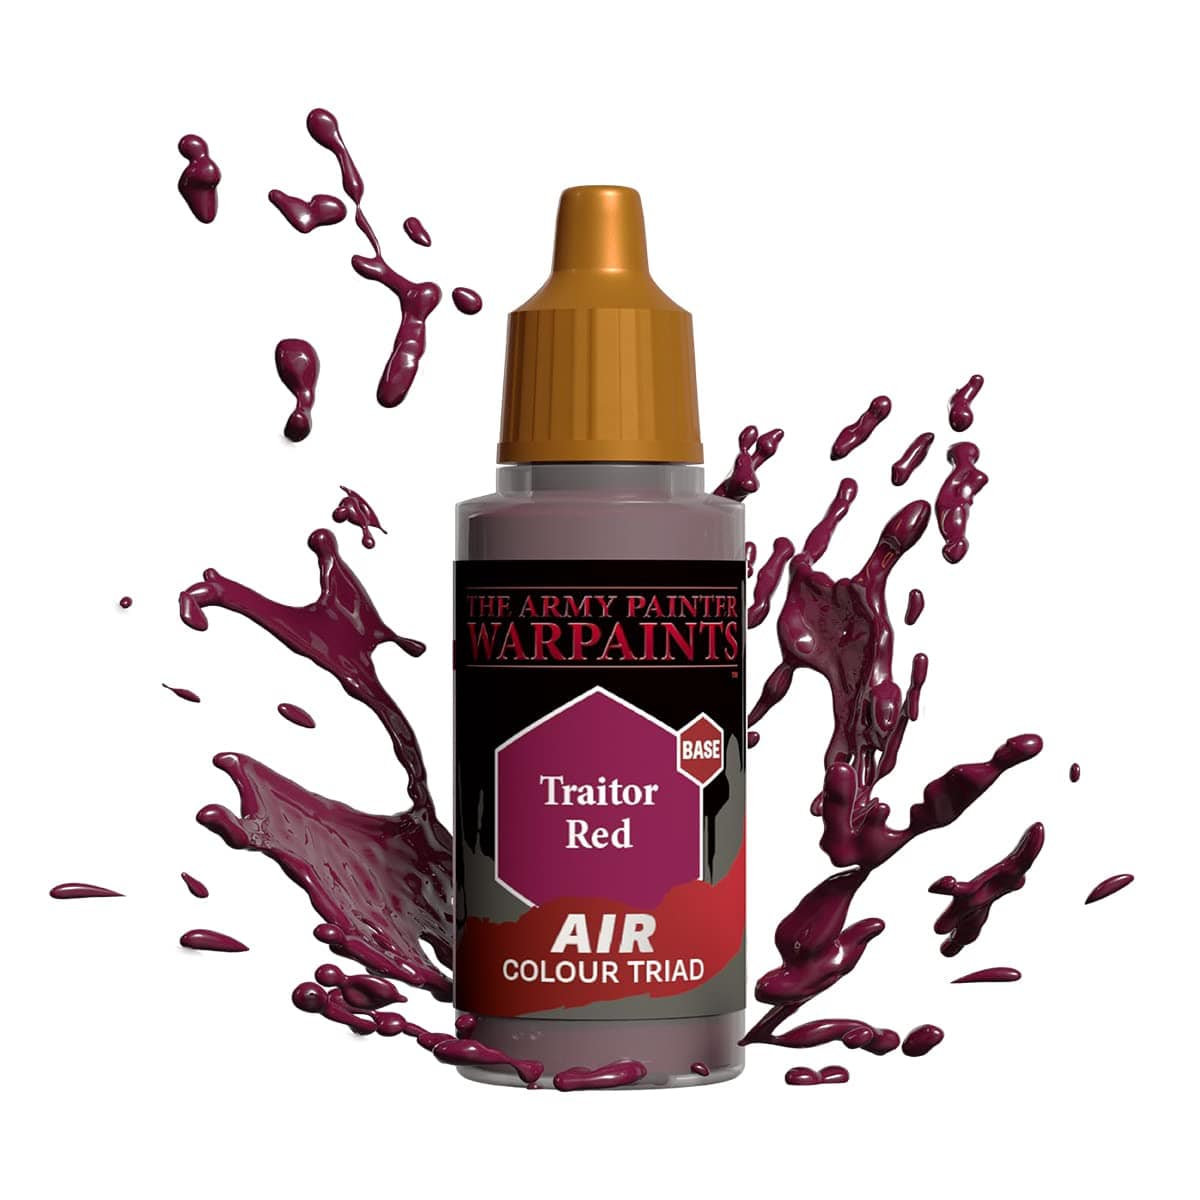 The Army Painter Accessories The Army Painter Warpaints Air: Traitor Red 18ml